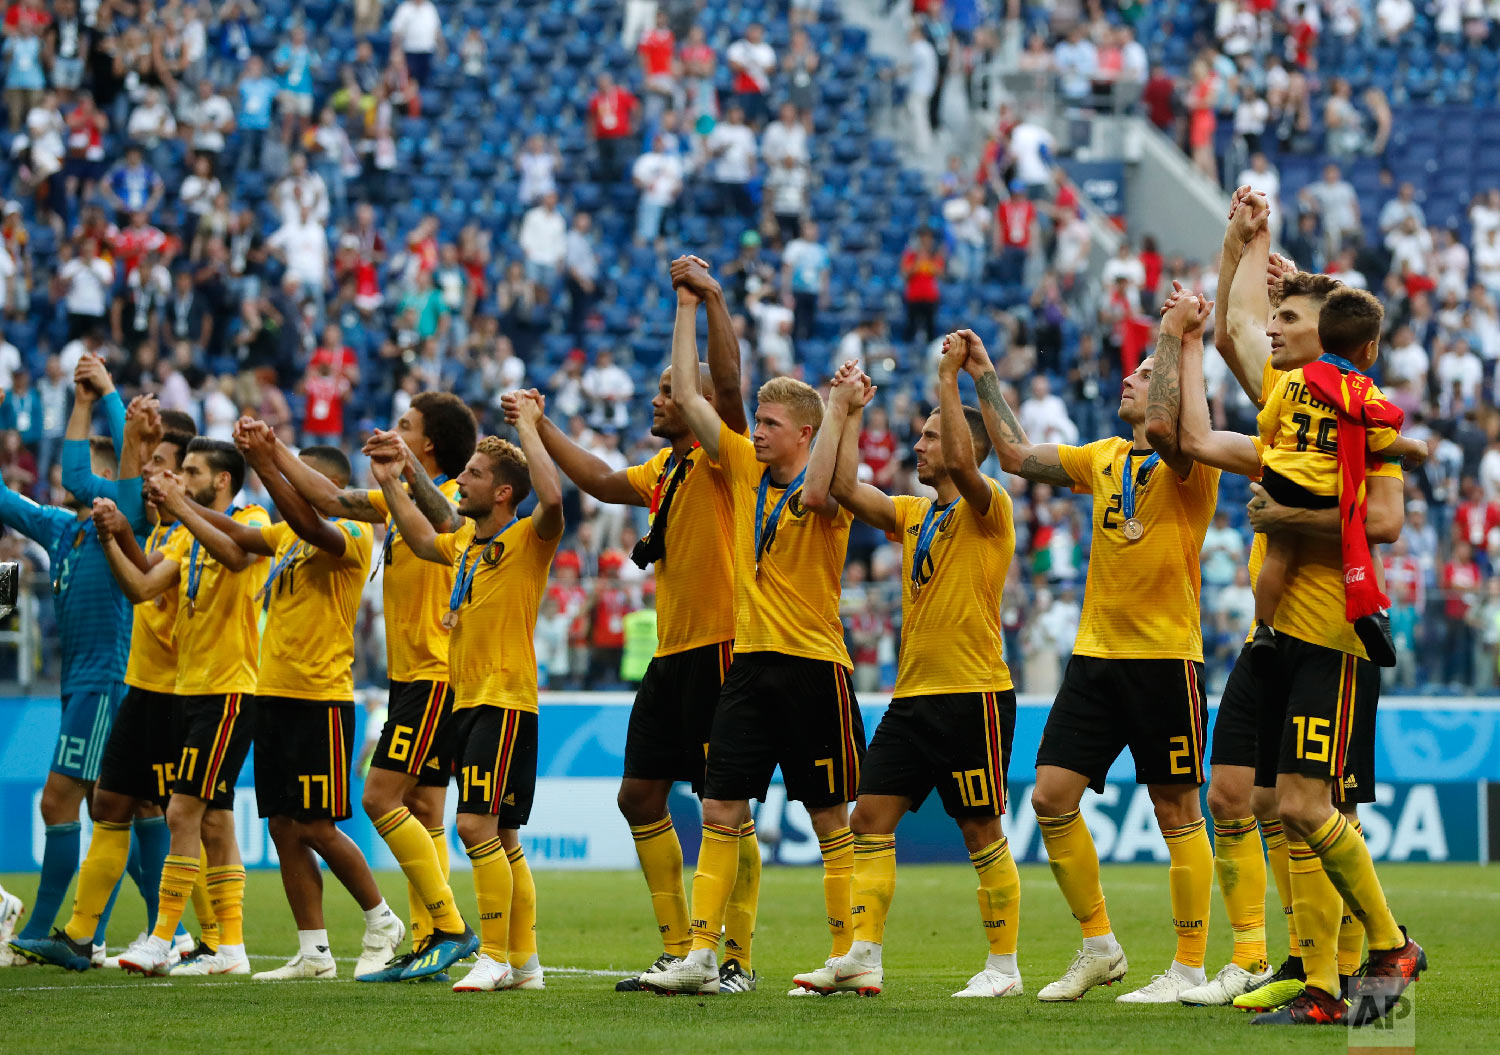  Belgium players salute the fans after defeating England in the third place match at the 2018 soccer World Cup in the St. Petersburg Stadium in St. Petersburg, Russia, Saturday, July 14, 2018. (AP Photo/Petr David Josek) 